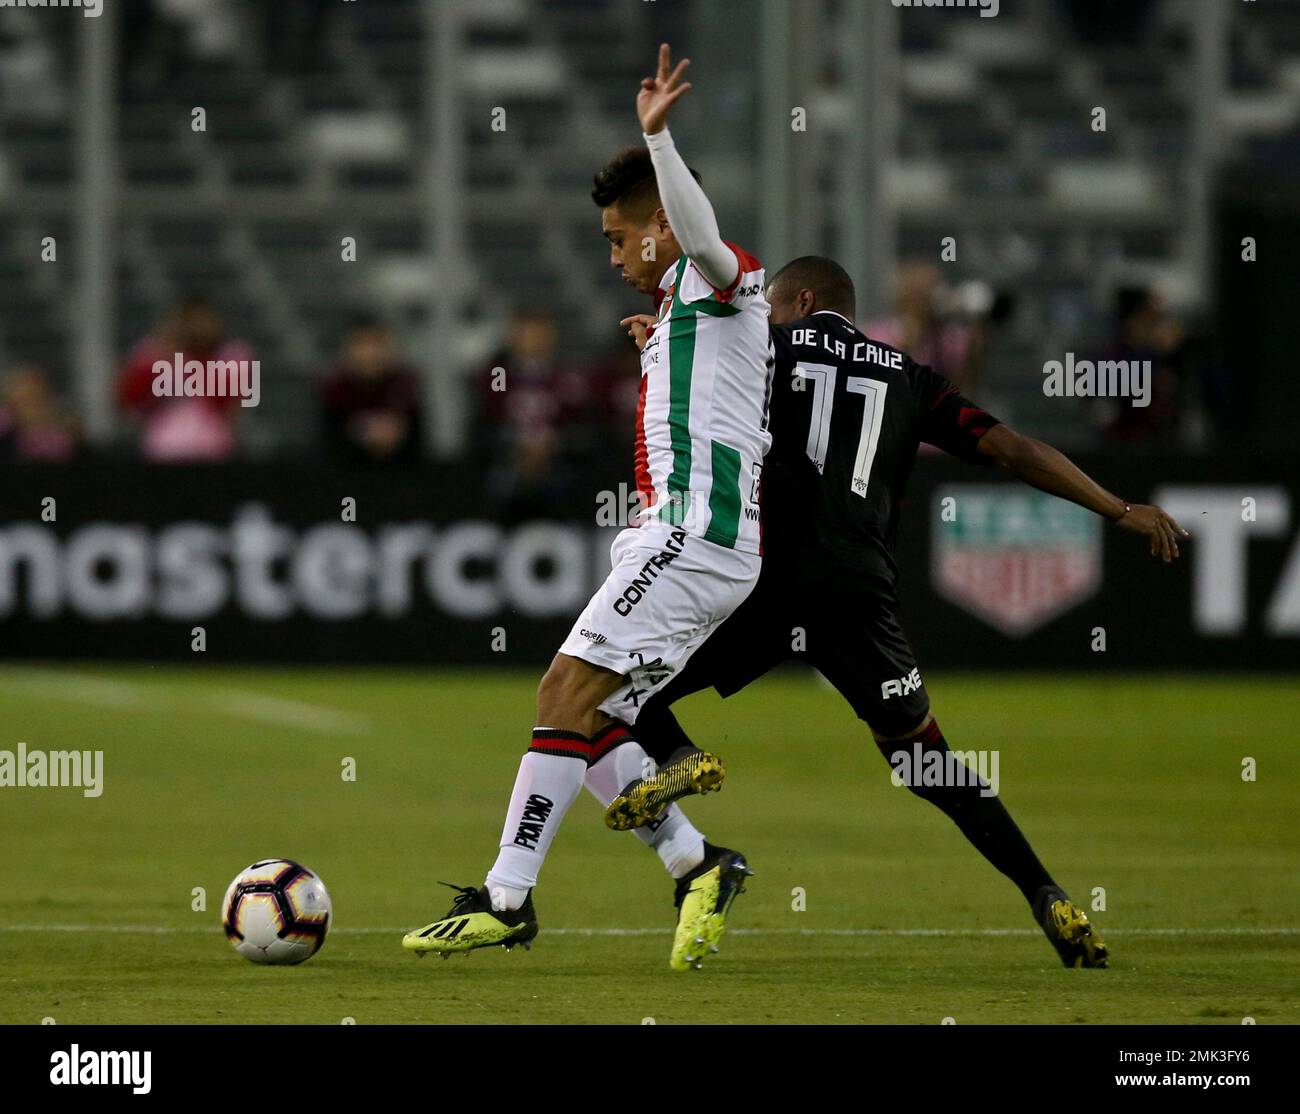 Diego De La Cruz Arcosa of Argentina's River Plate, right, fights the ball  with Fabian Ahumada of Chile's Palestino during a Copa Libertadores soccer  match in Santiago, Chile, Wednesday, April 24, 2019. (